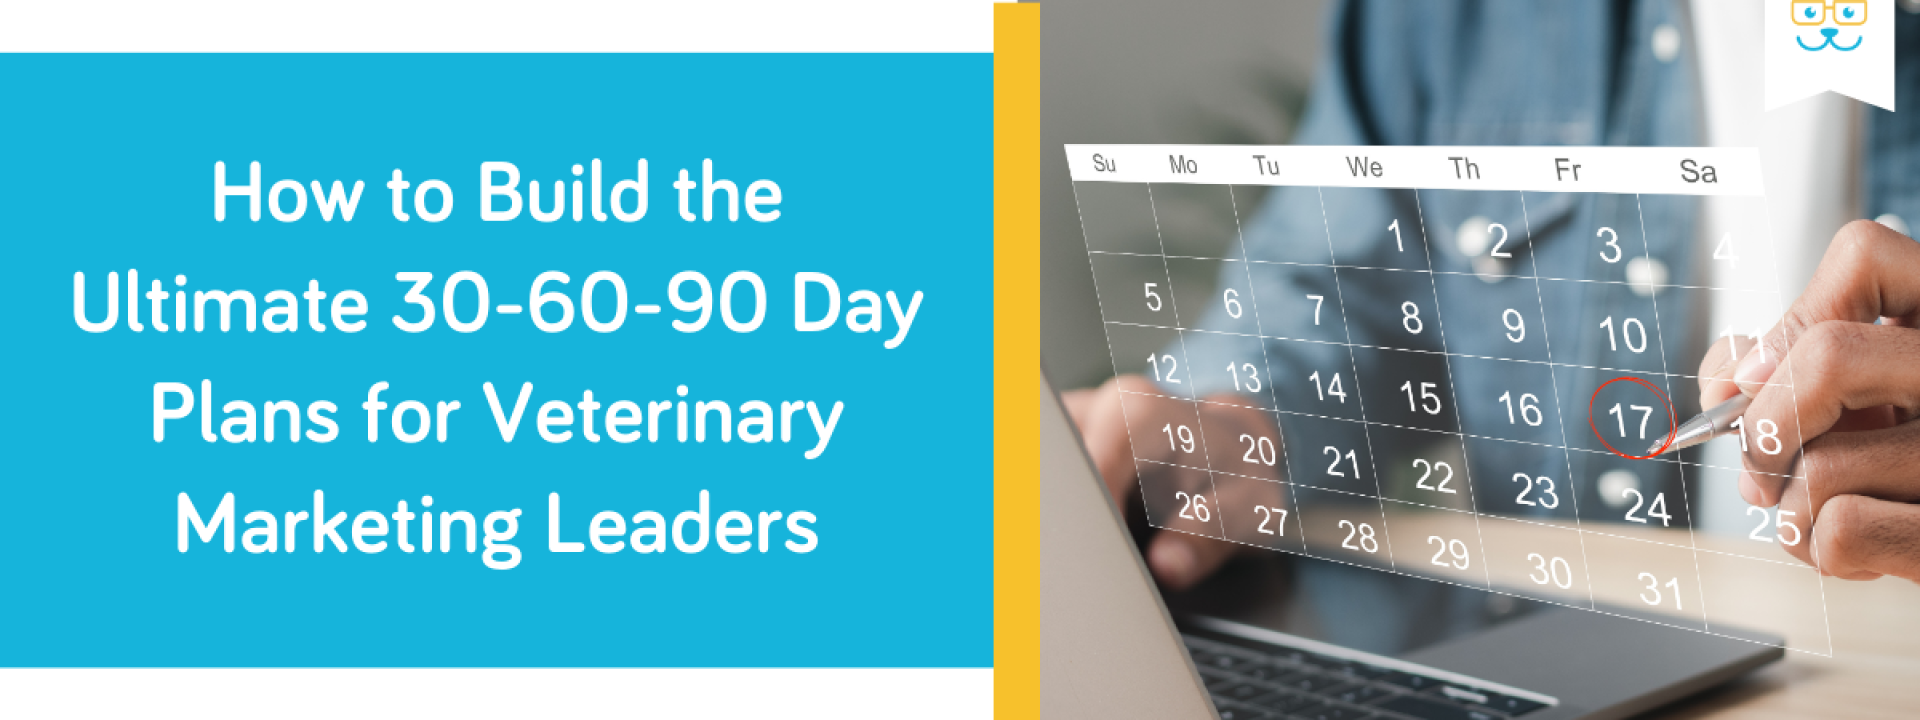 How to Build the Ultimate 30-60-90 Day Plans for Veterinary Marketing Leaders